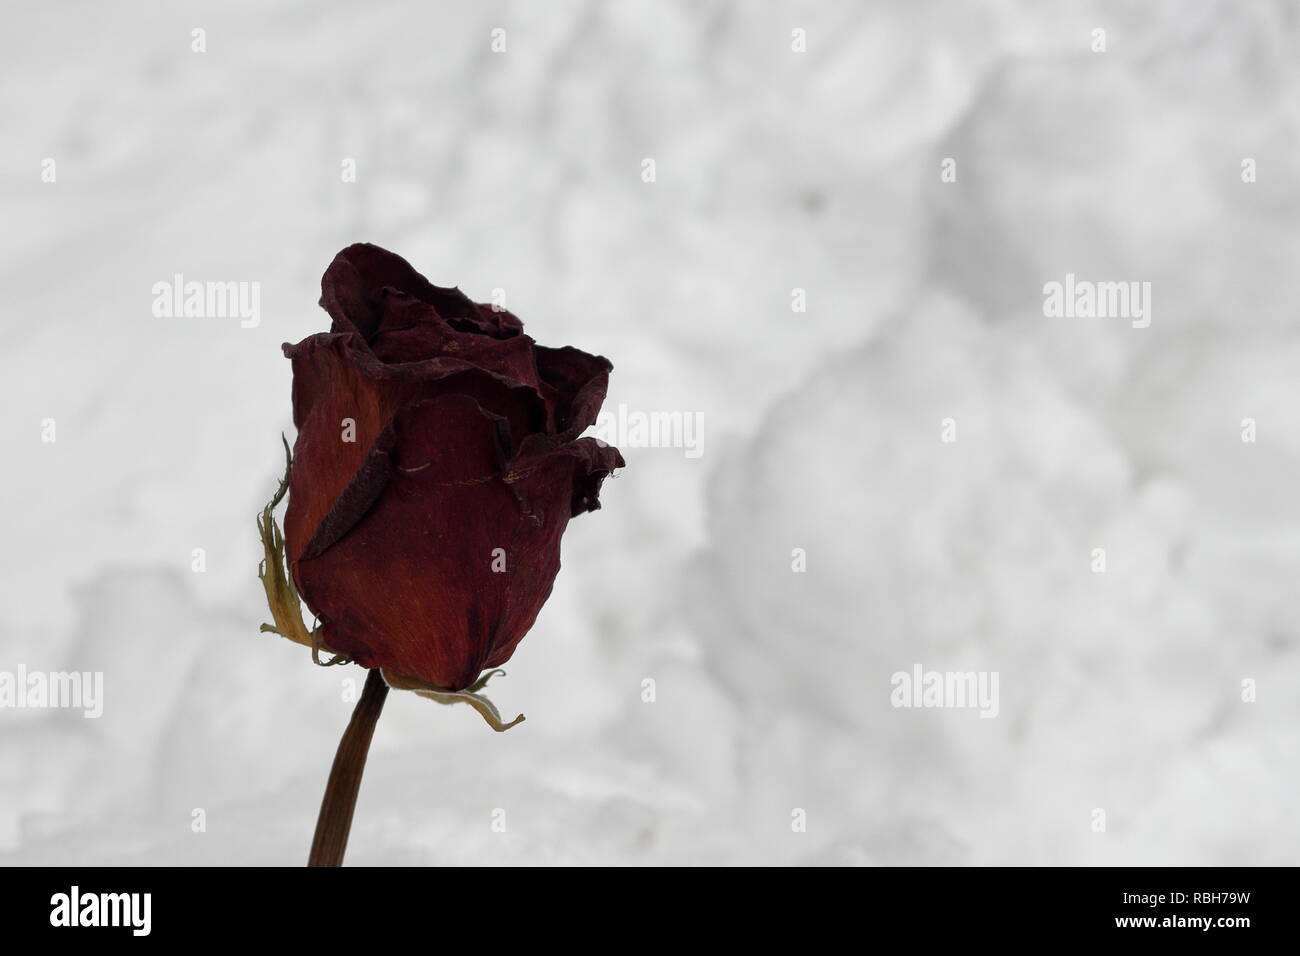 Dry red rose, snow in the background Stock Photo